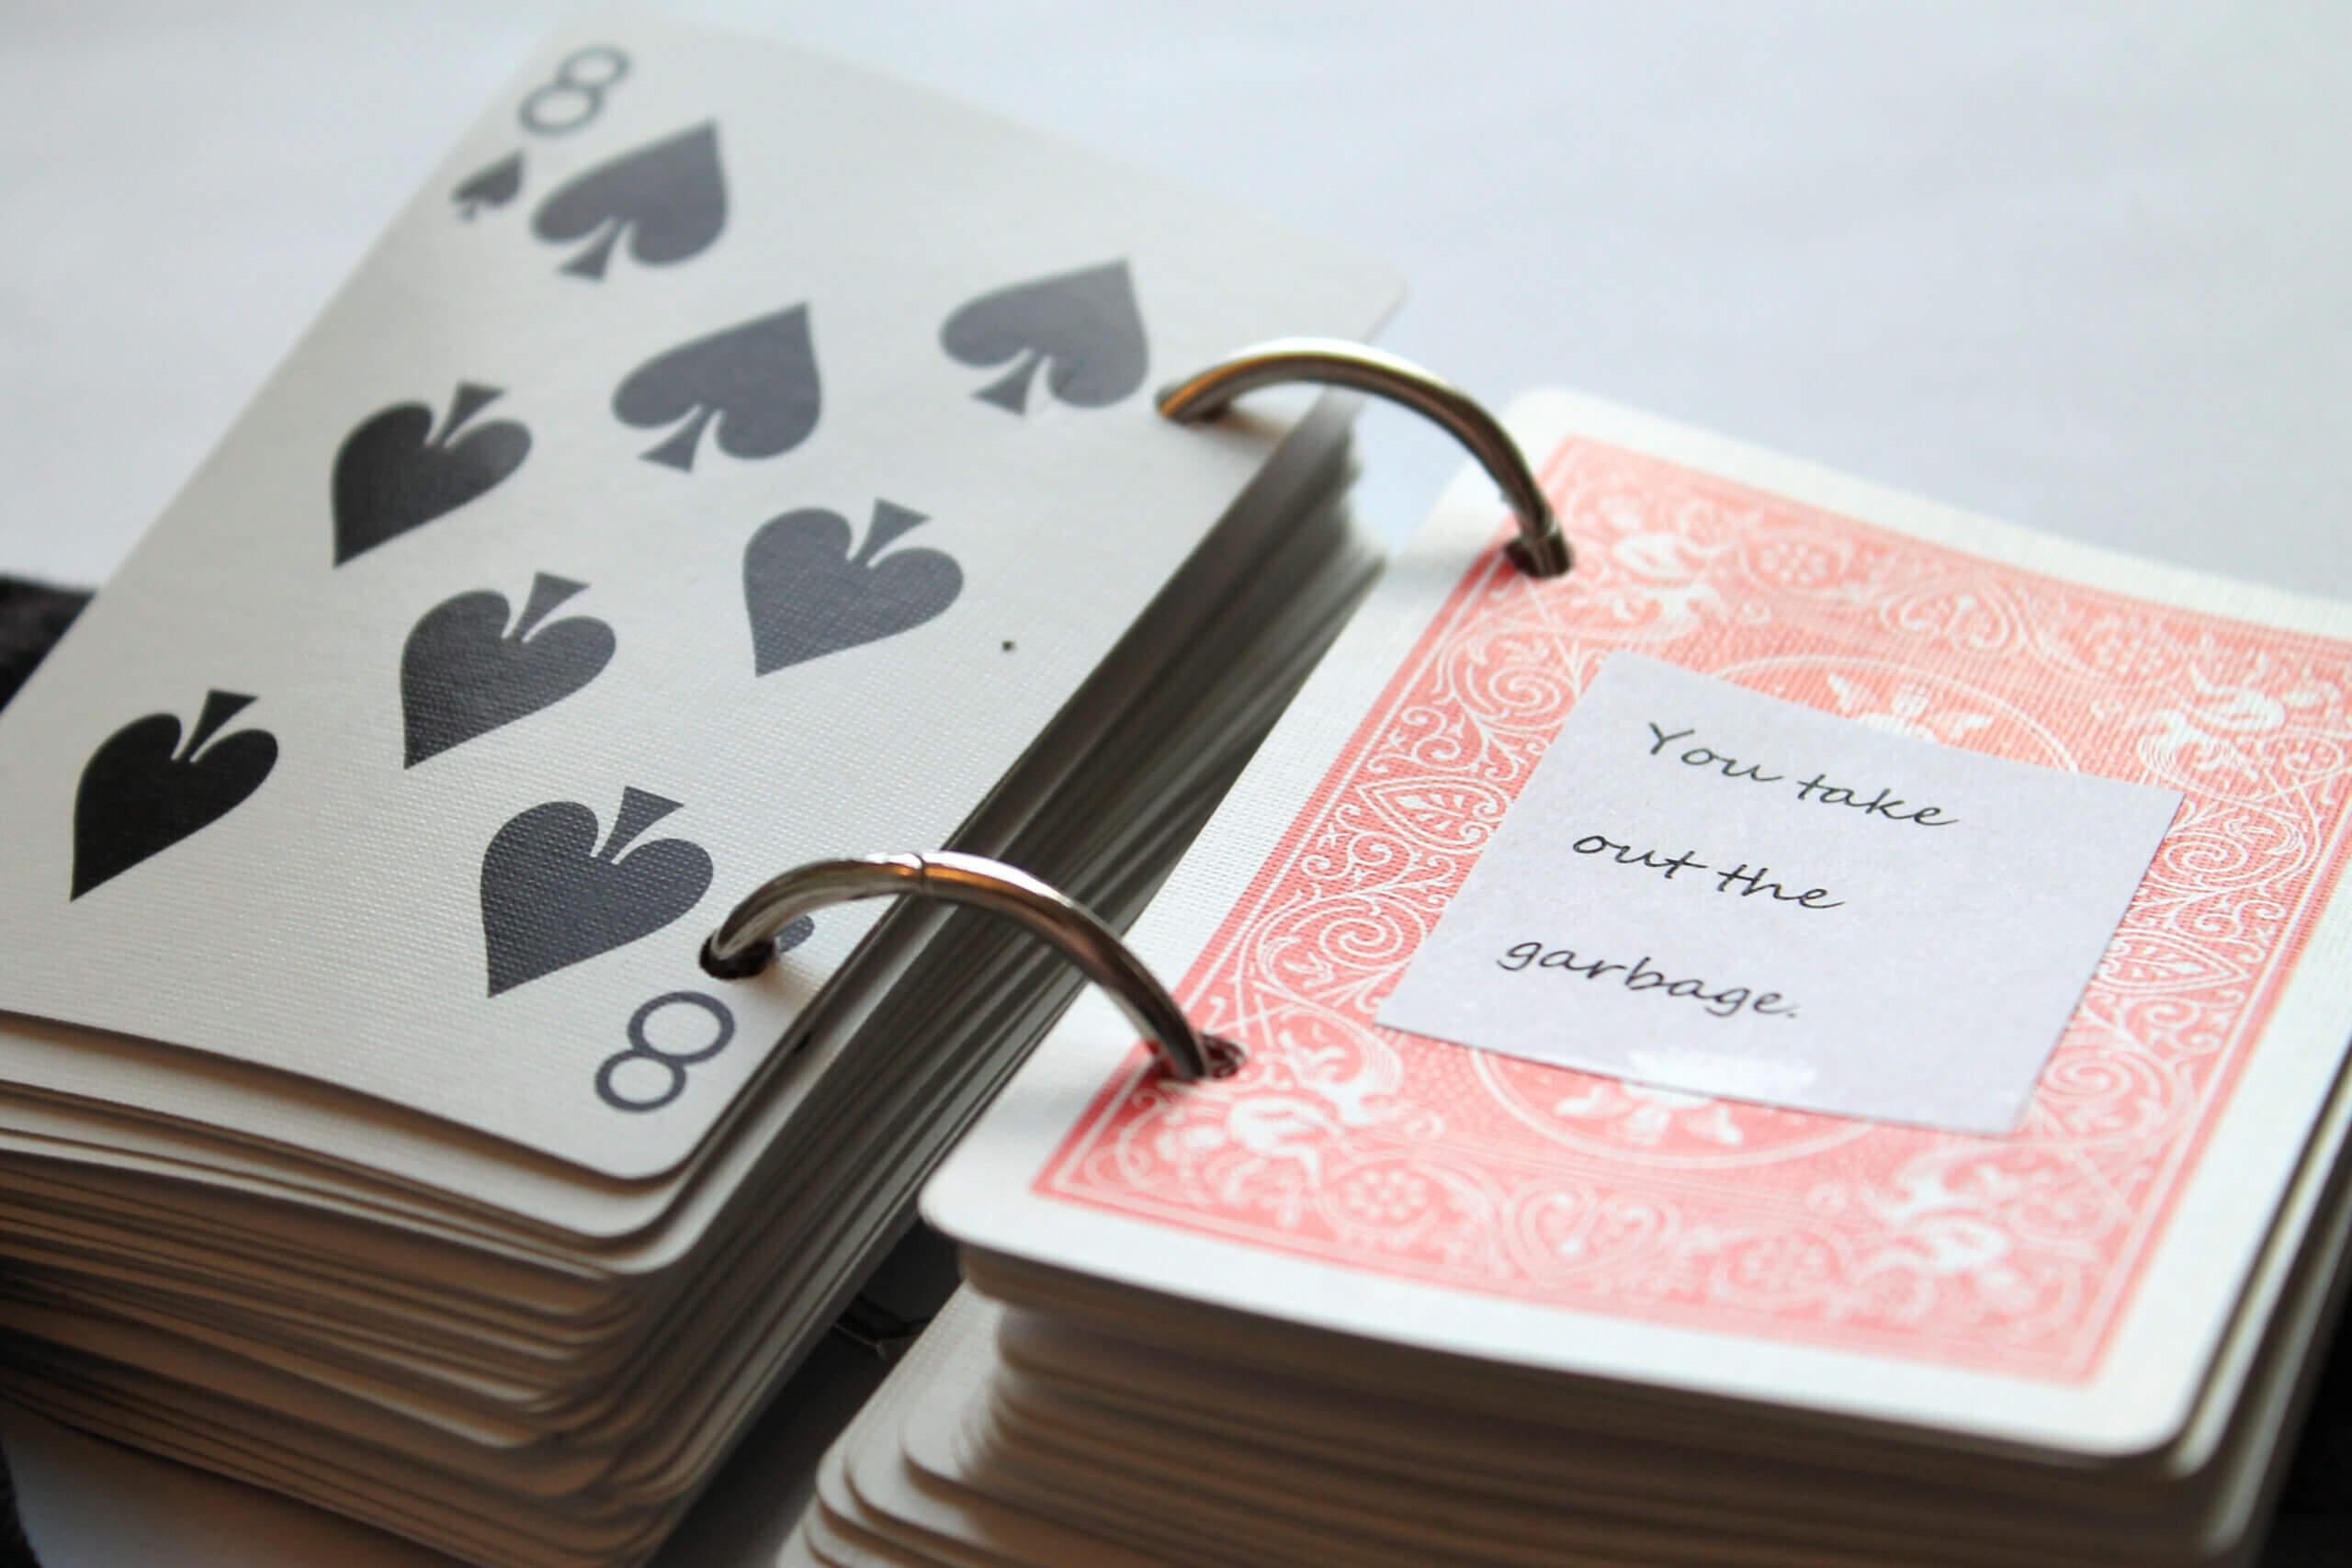 52 Reasons I Love You – Playing Card Book Tutorial Pertaining To 52 Things I Love About You Deck Of Cards Template